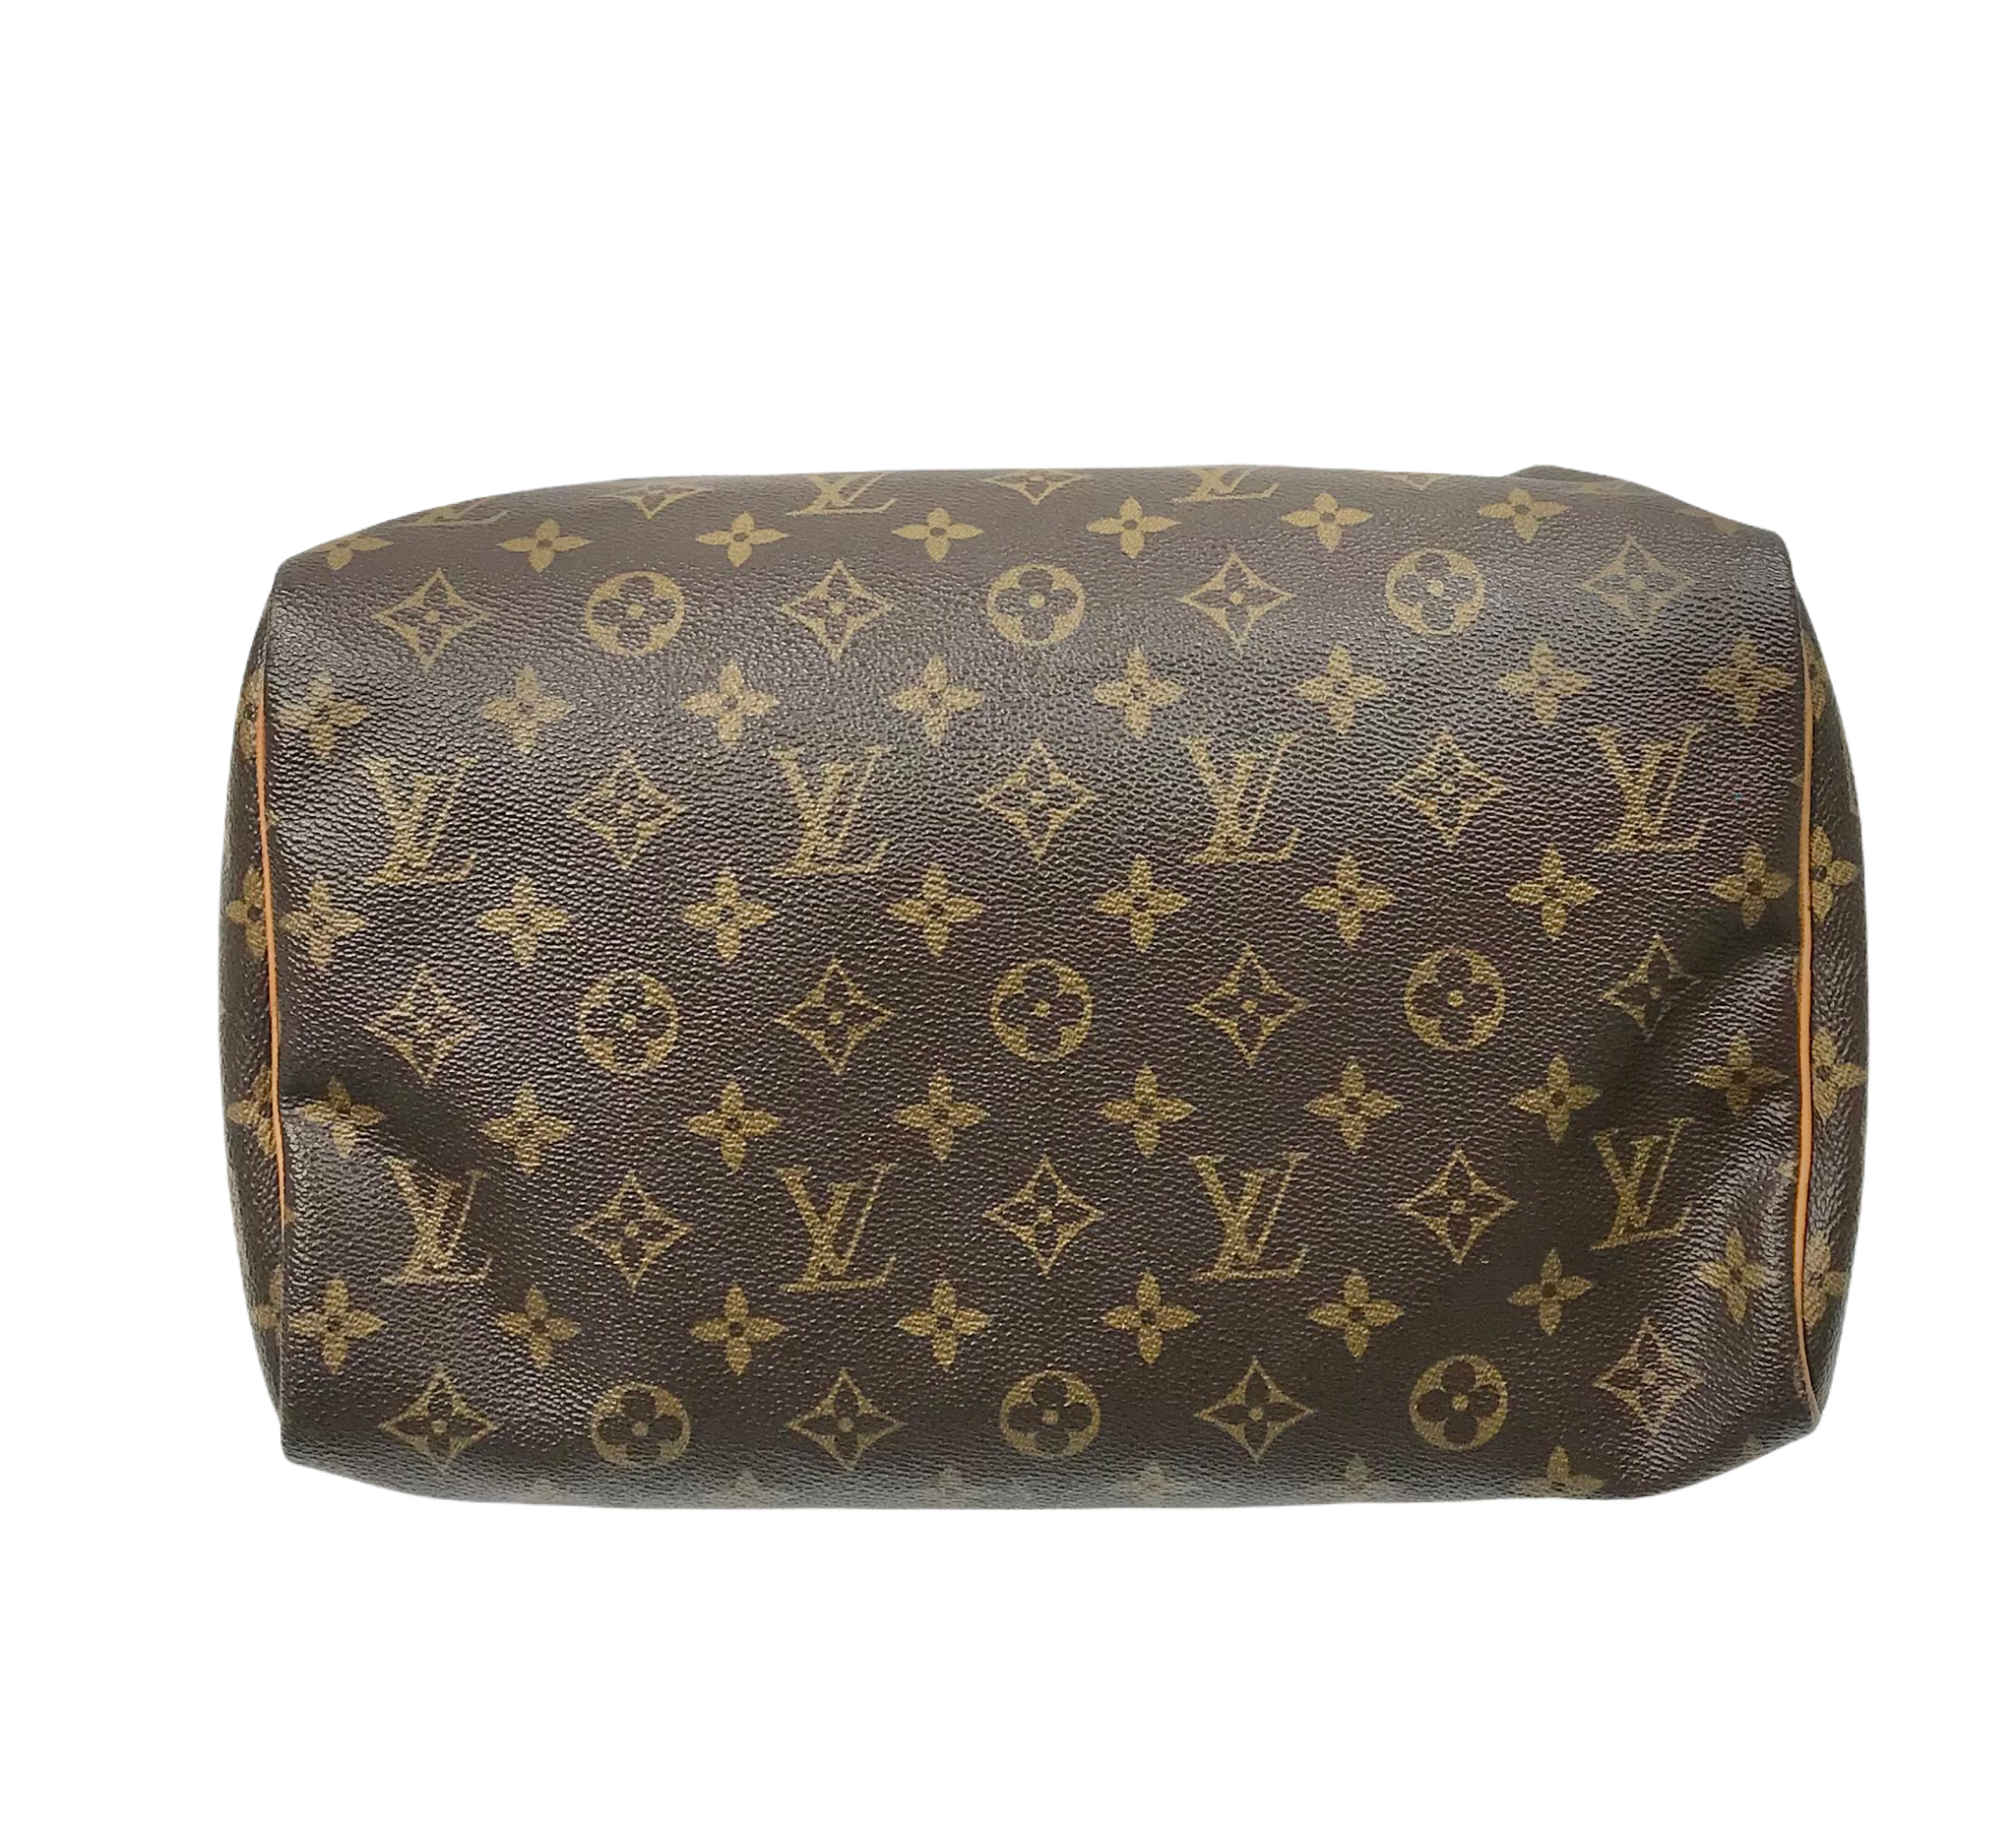 JUST IN!!! The perfect pair 💕 gently used louis vuitton bag